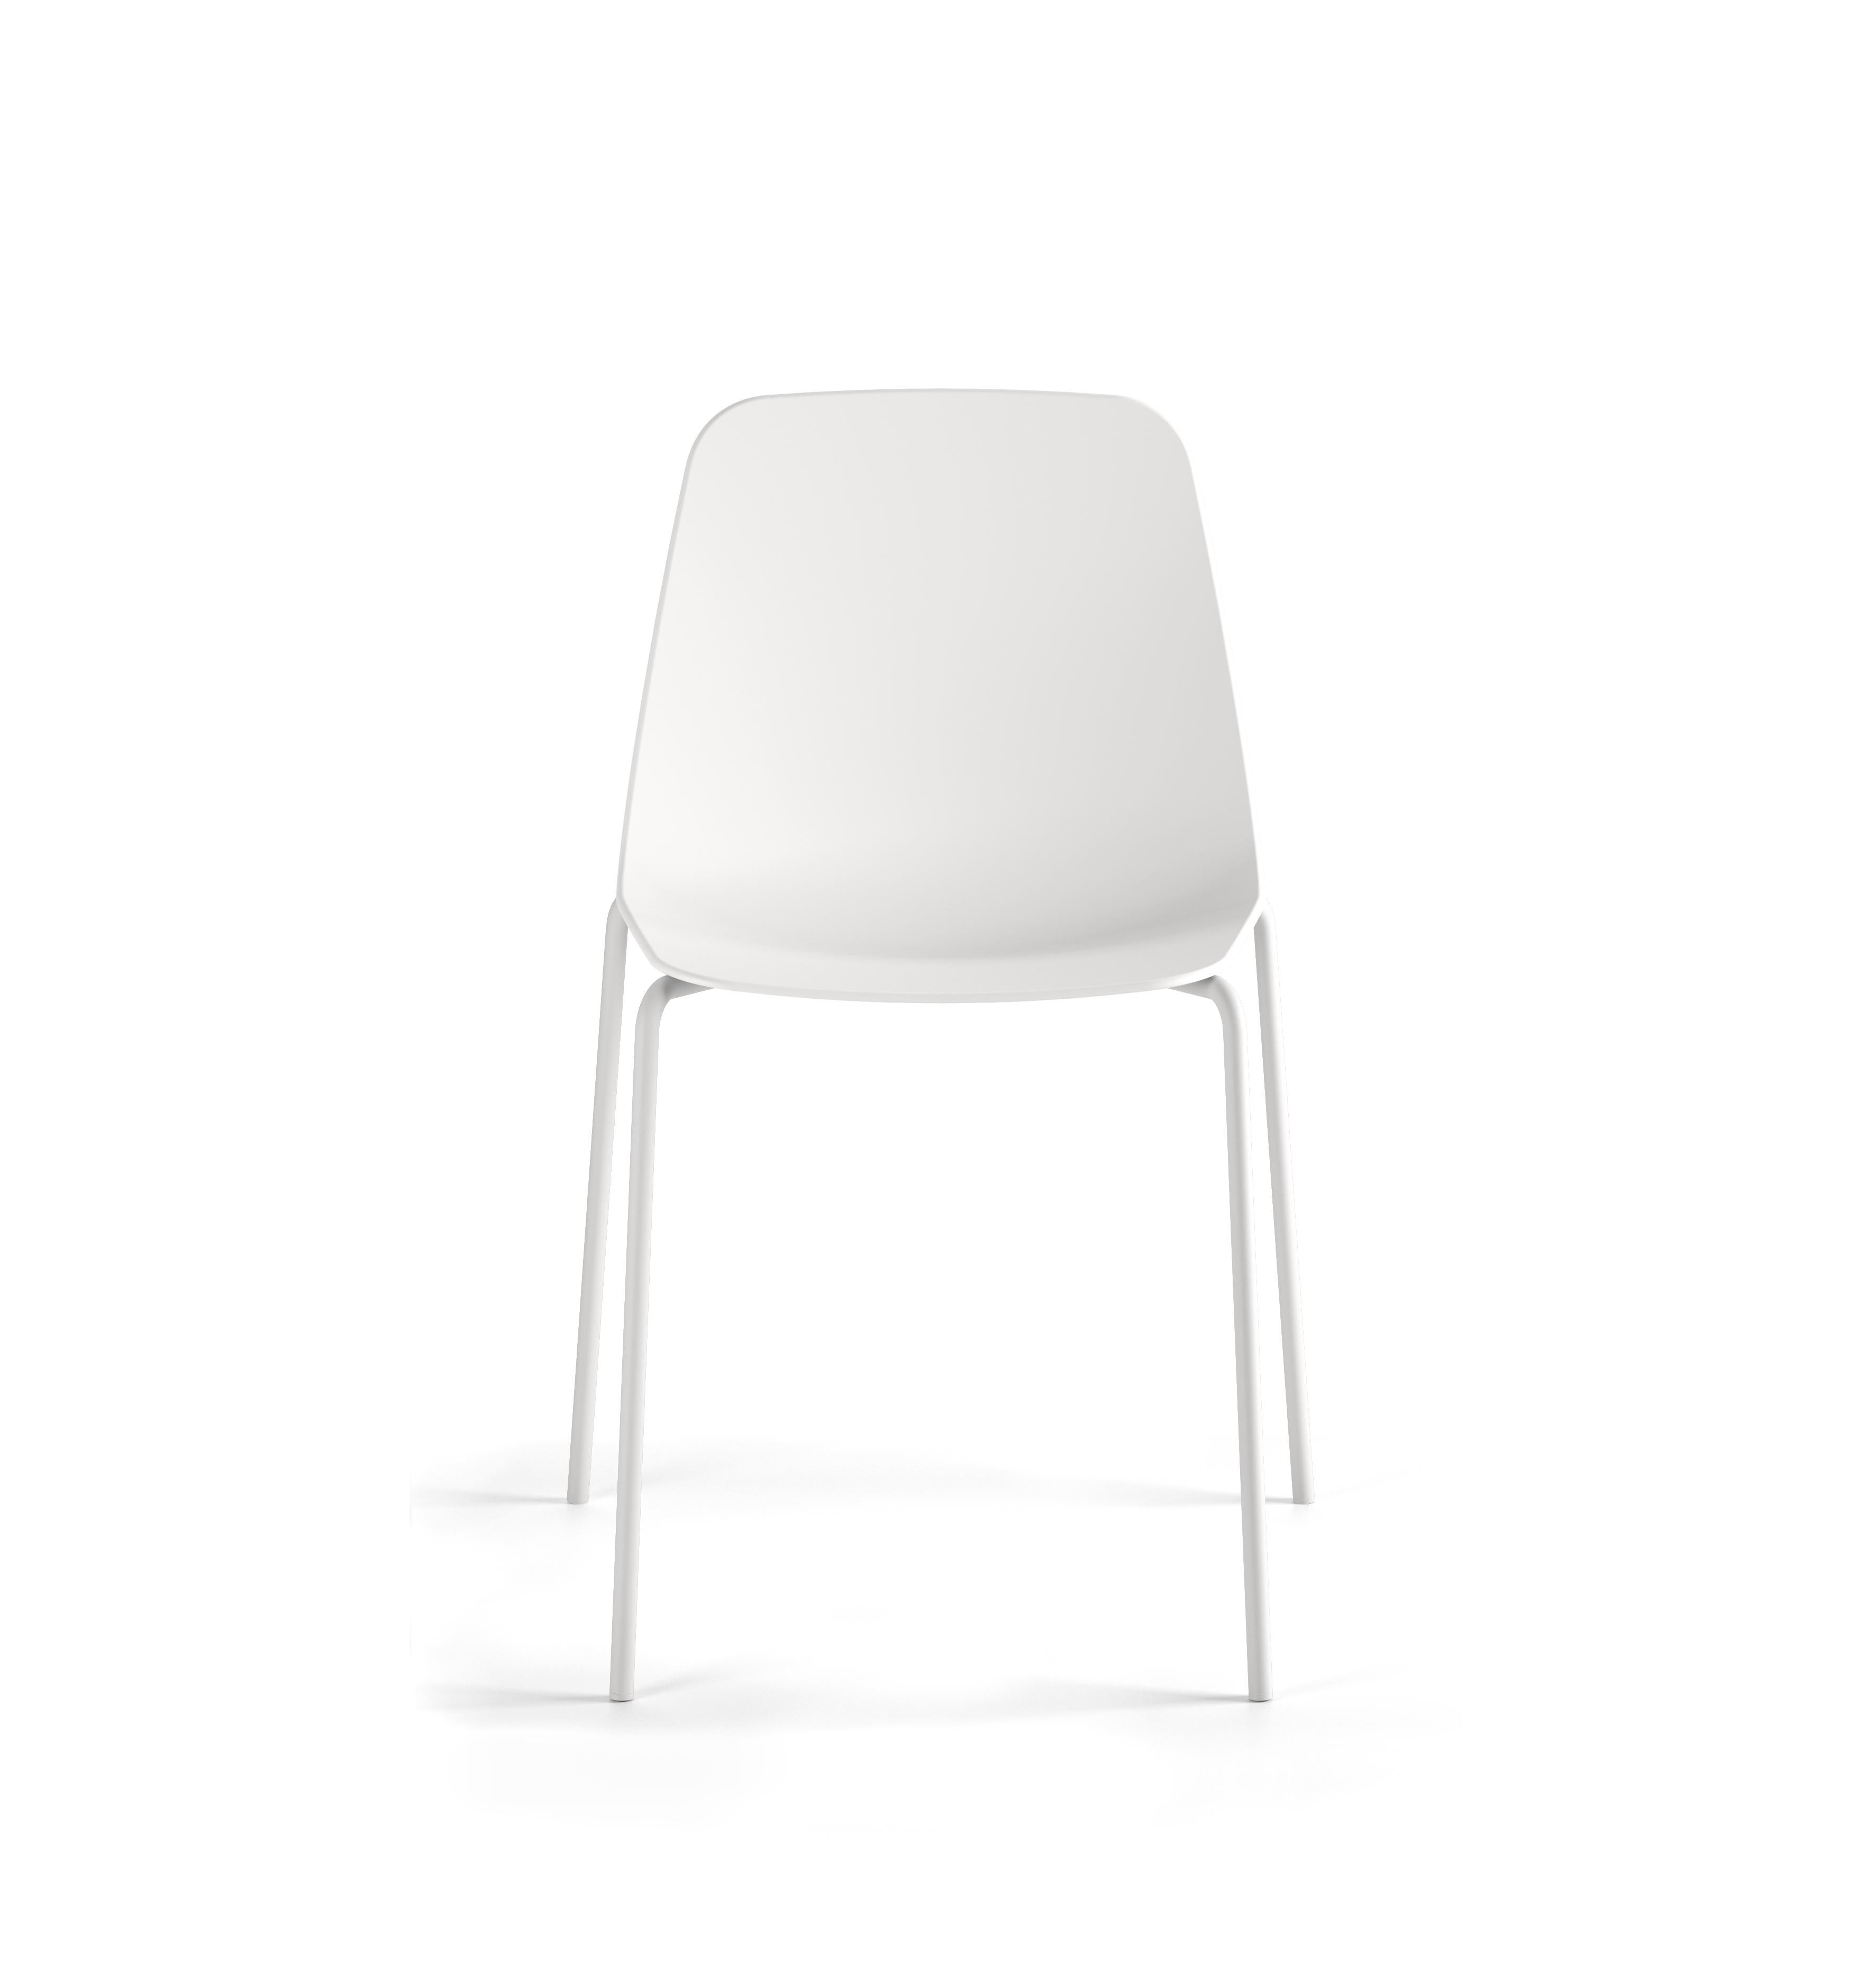 white plastic chairs with metal legs